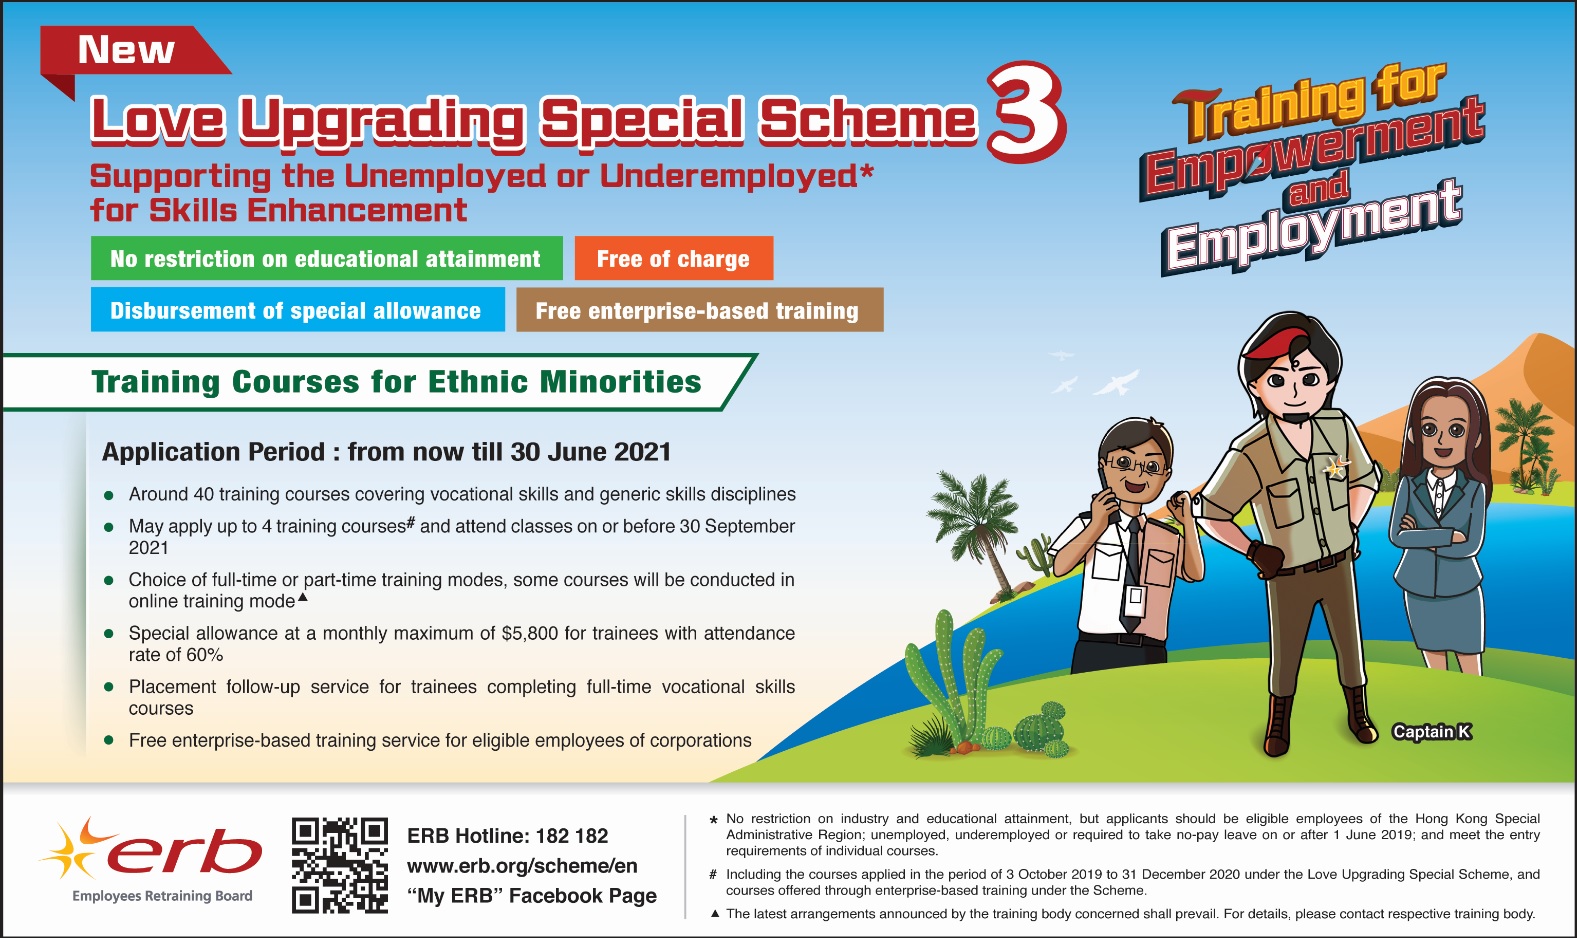 Click here to download the image version of newspaper advertisement of Love Upgrading Special Scheme 3